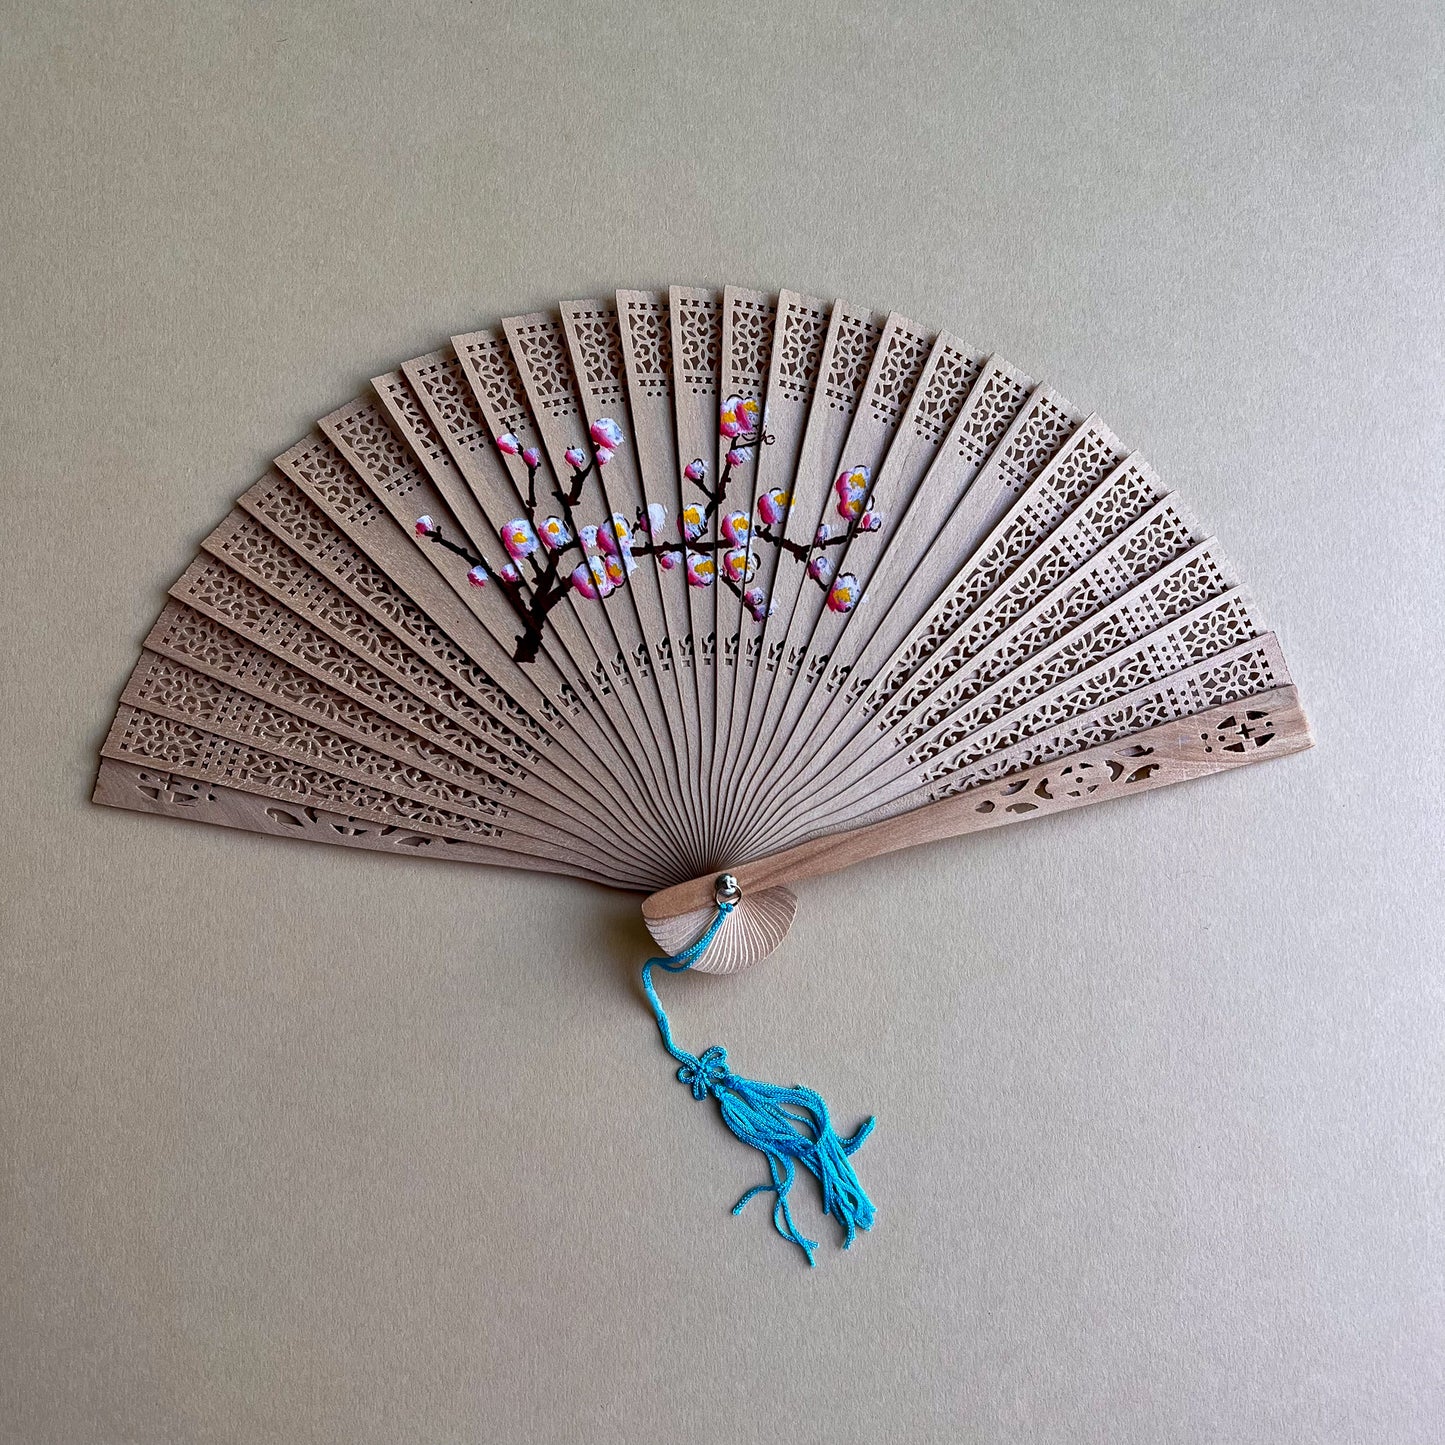 Vintage Hand-Cut Wood Fan With Blue Tassel and Painted Cherry Blossoms